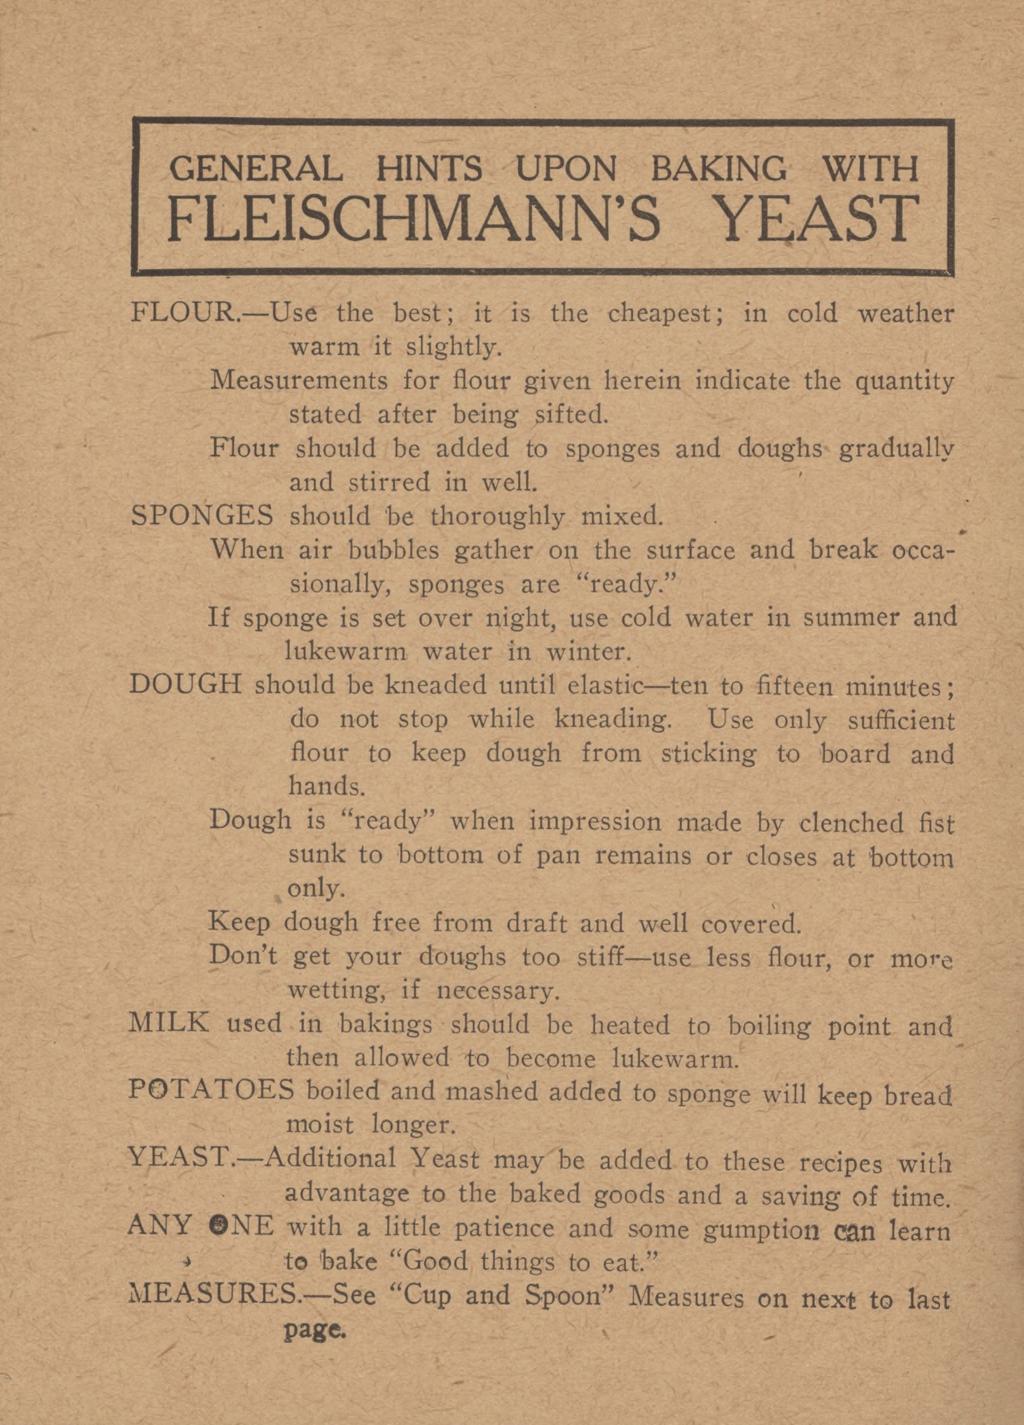 GENERAL HINTS UPON BAKING WITH FLEISCHMANN S YEAST FLOUR. Use the best; it is the cheapest; in cold weather warm it slightly.